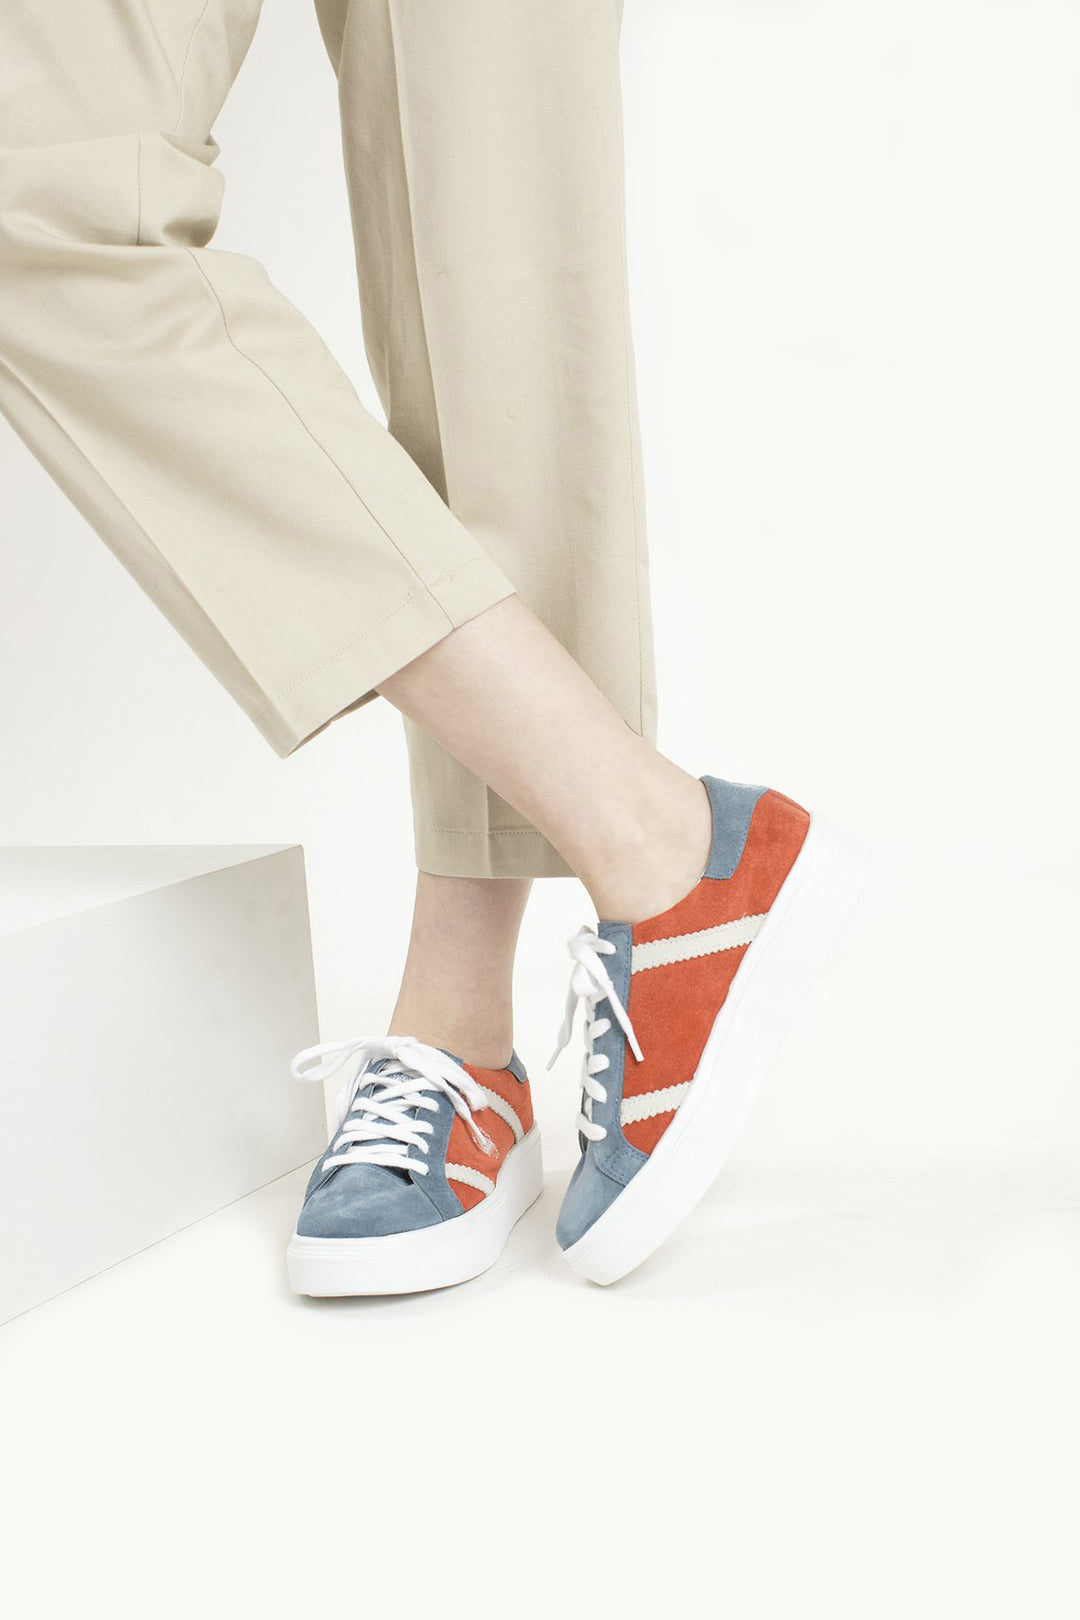 Hand Matters. Suede and leather sneakers. Blue and red